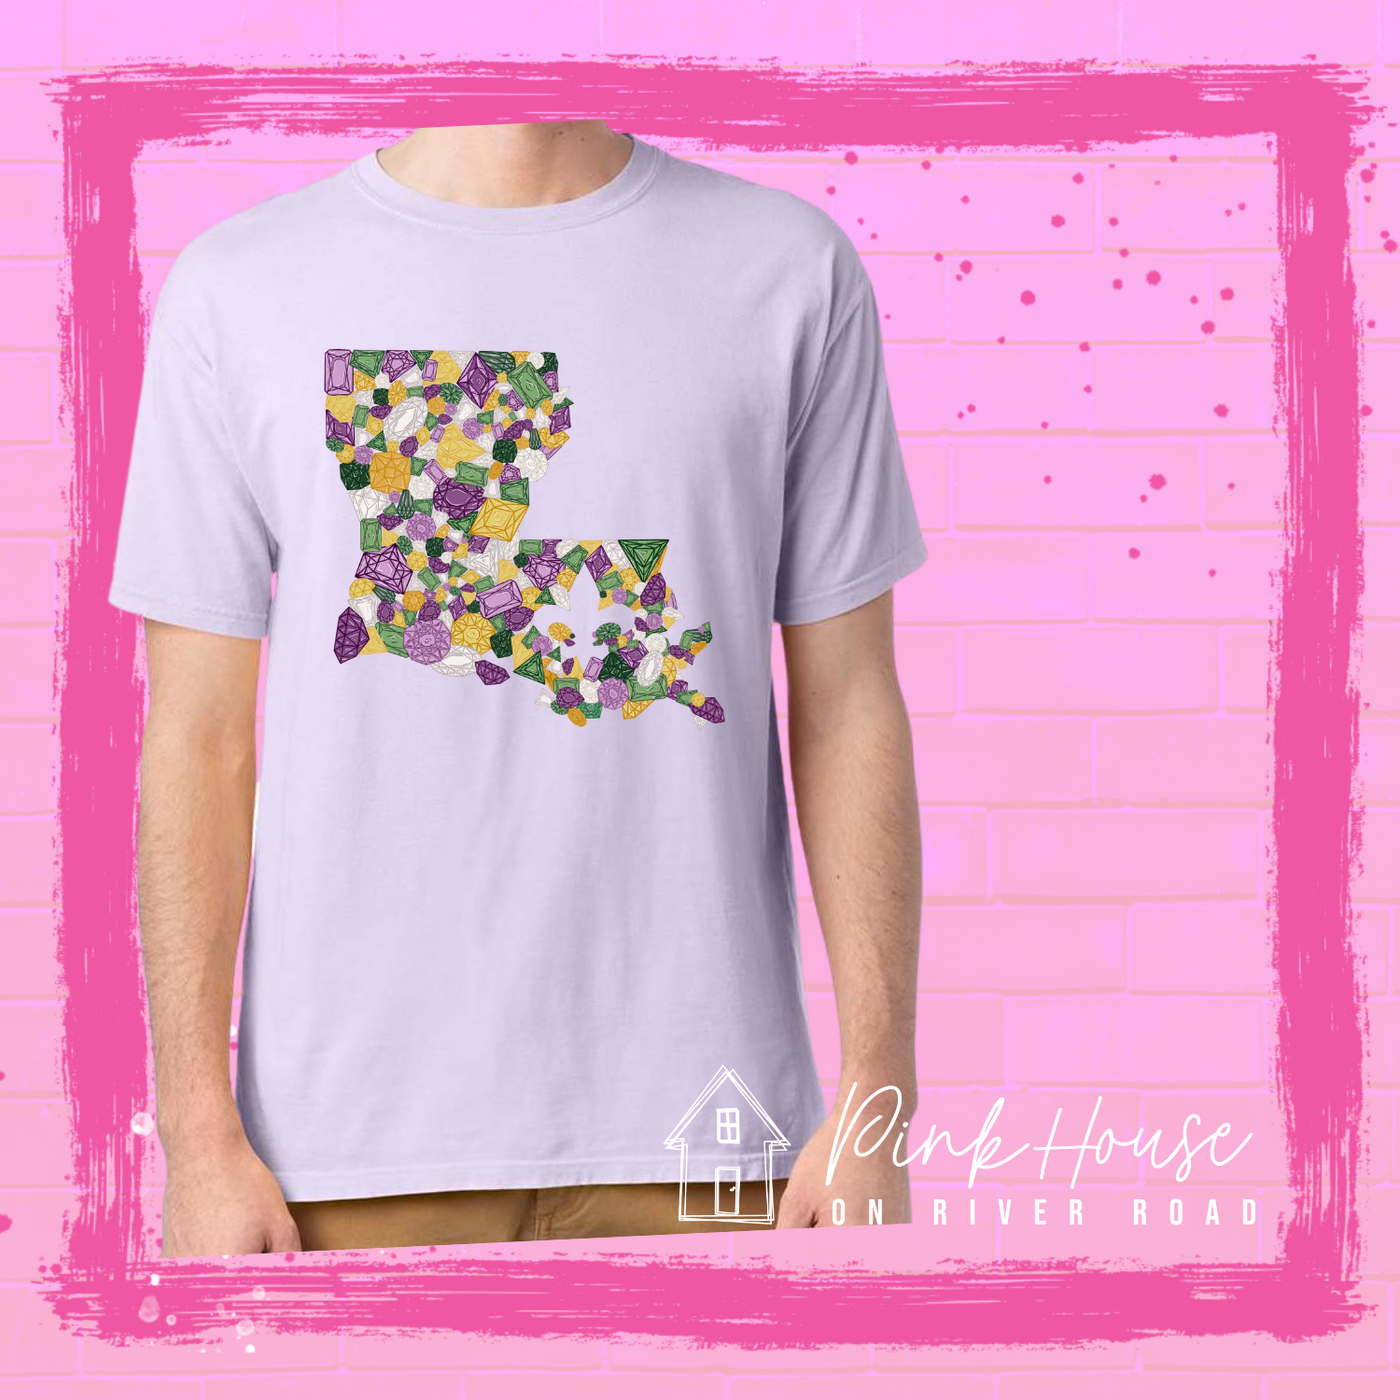 Lavender tee with a graphic of the state of Louisiana compromised of different shapes and sizes of purple, green, yellow and clear jewels.